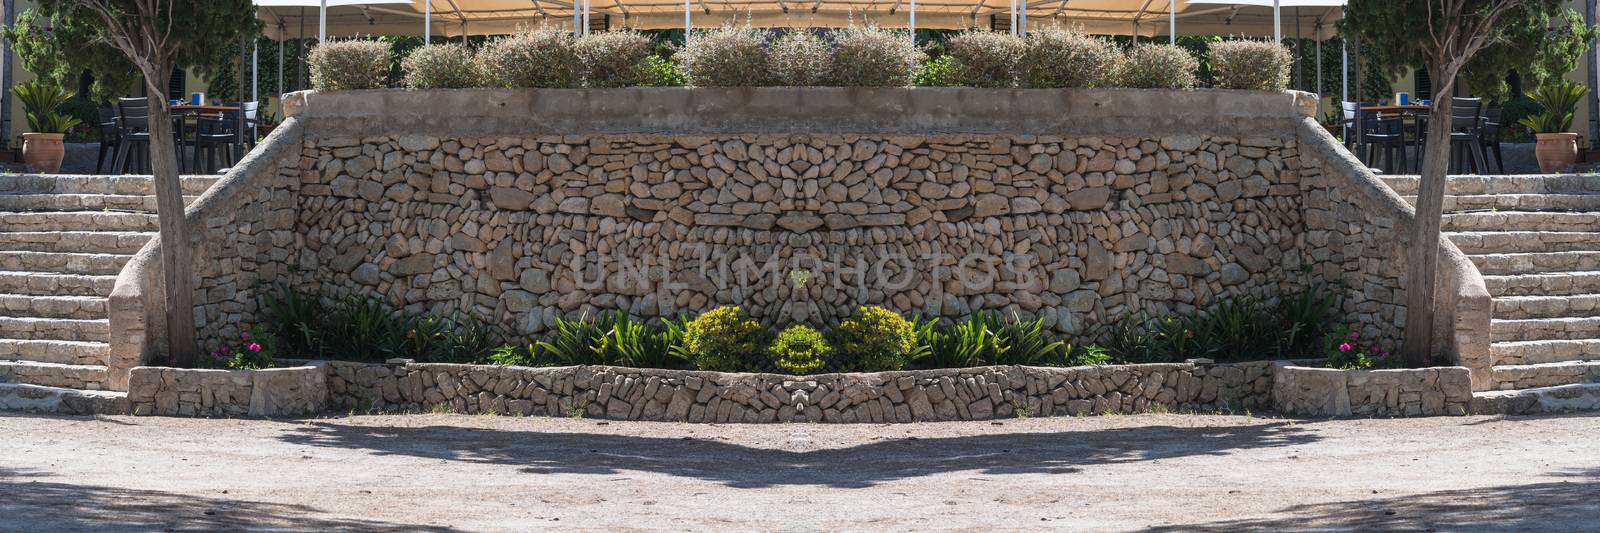 Mediterranean retaining wall of traditional natural stone for a terrace of a restaurant.